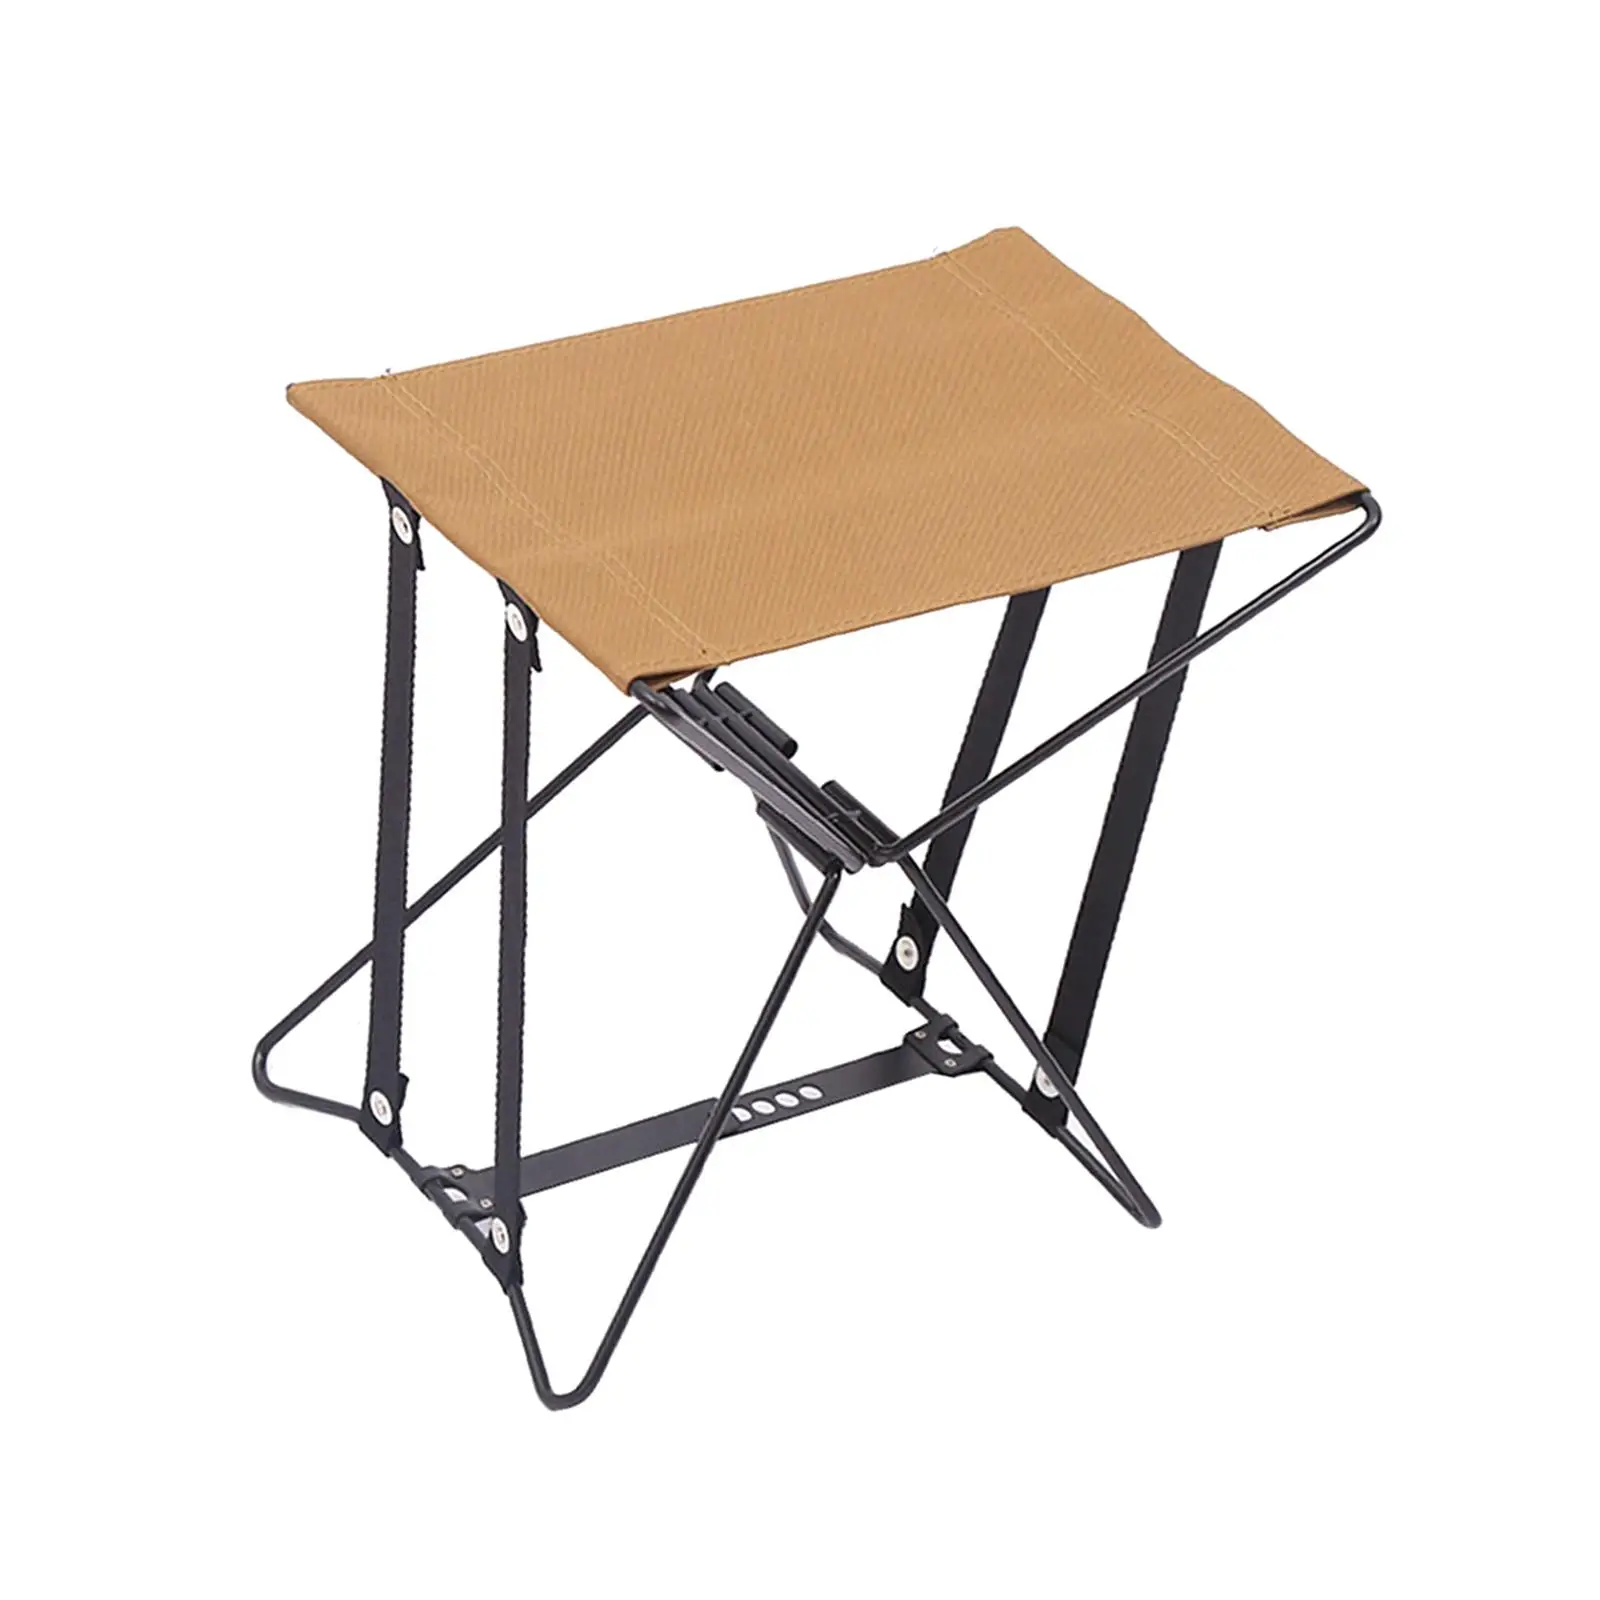 Portable Folding Stool Footrest with Carry Bag Camping Stool Foldable Footstool for Gardening Traveling Festival Outdoor Lawn